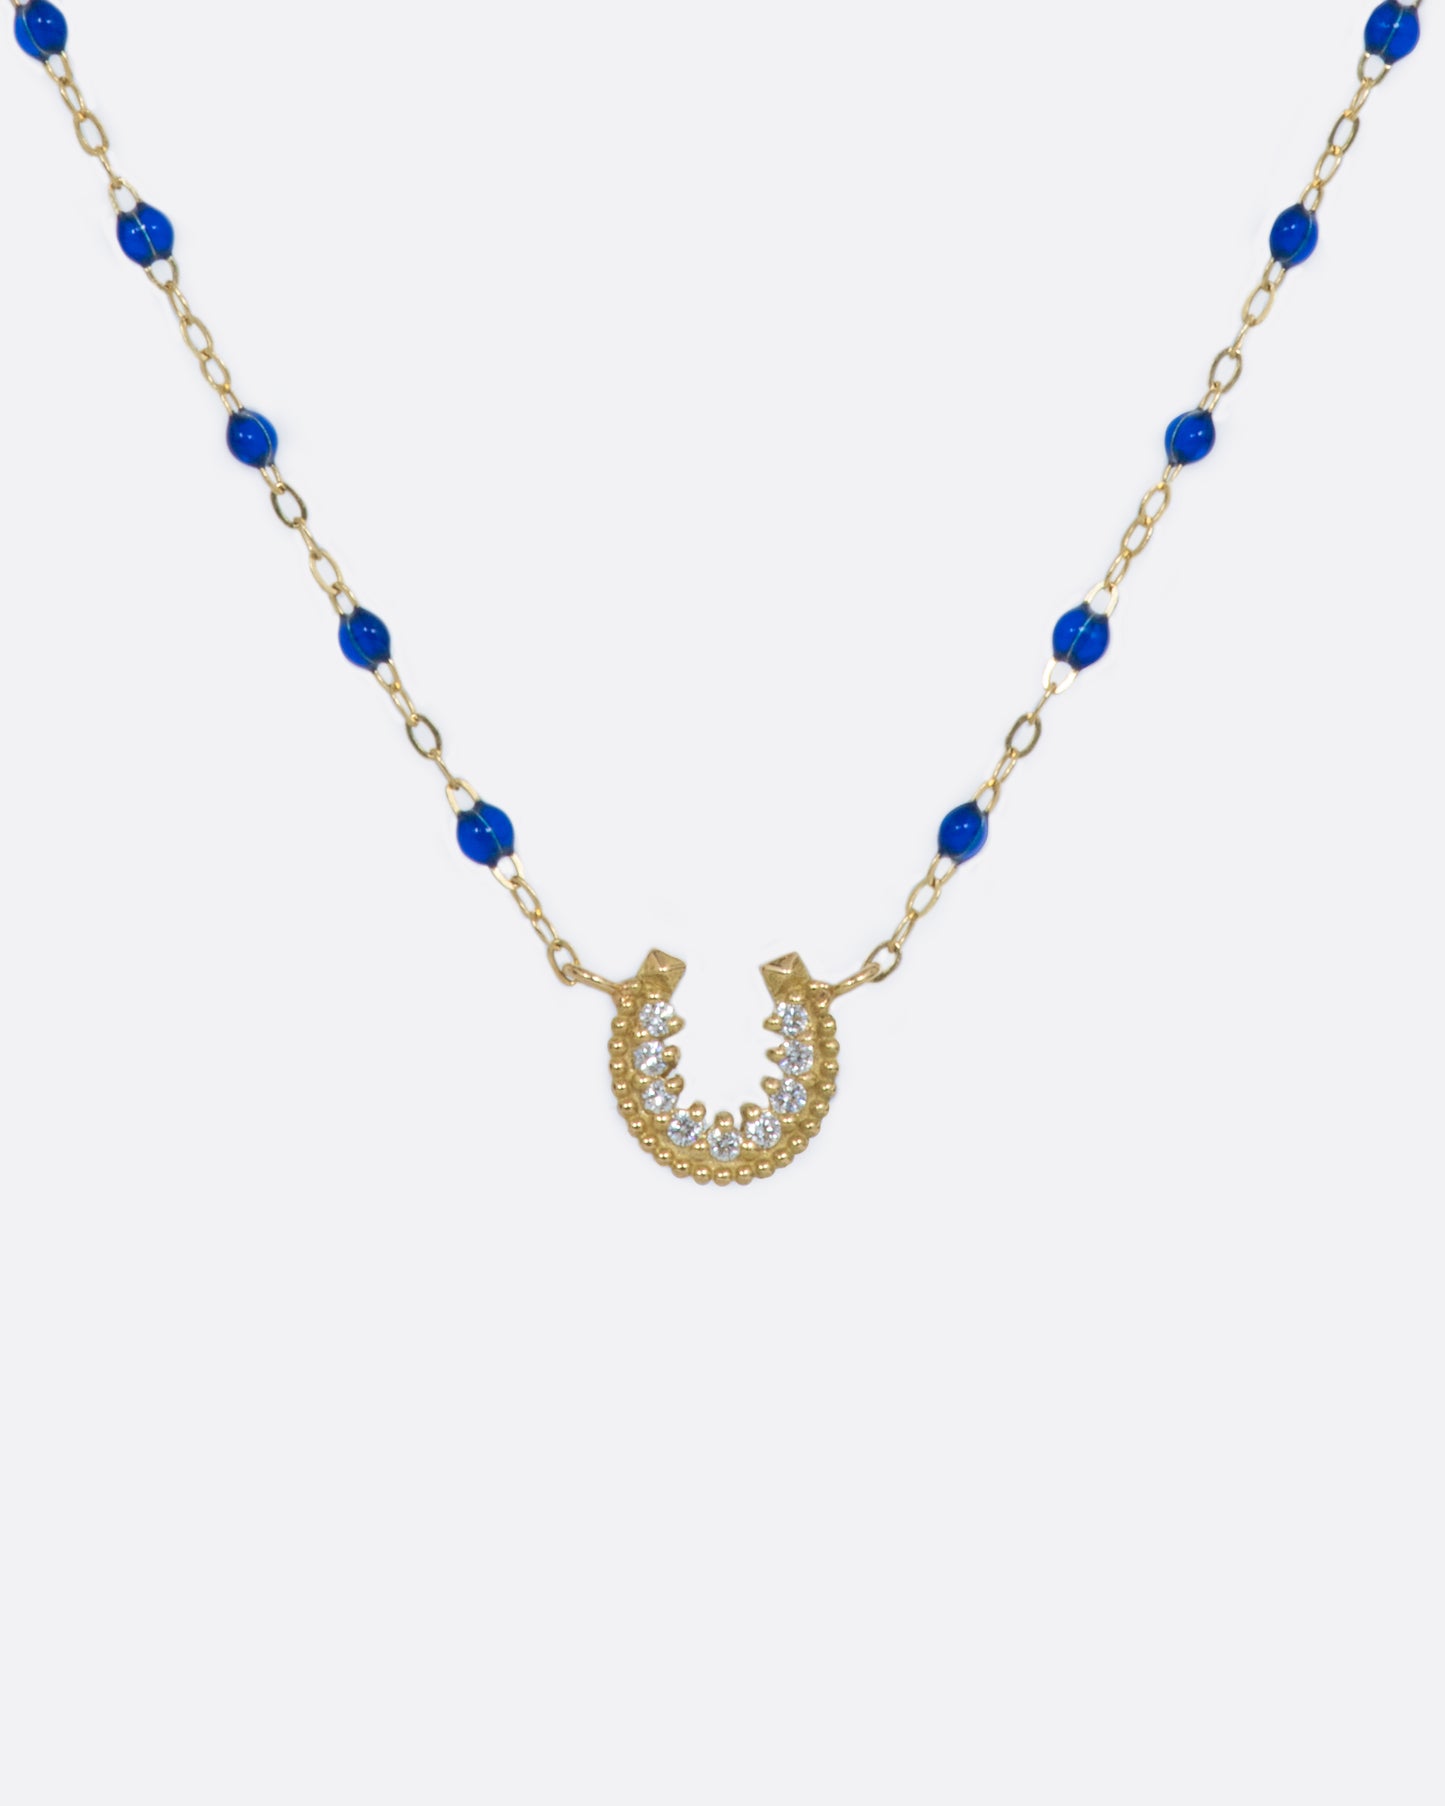 A yellow gold chain adorned with lapis blue resin beads and a lucky horseshoe pendant, lined with diamonds.